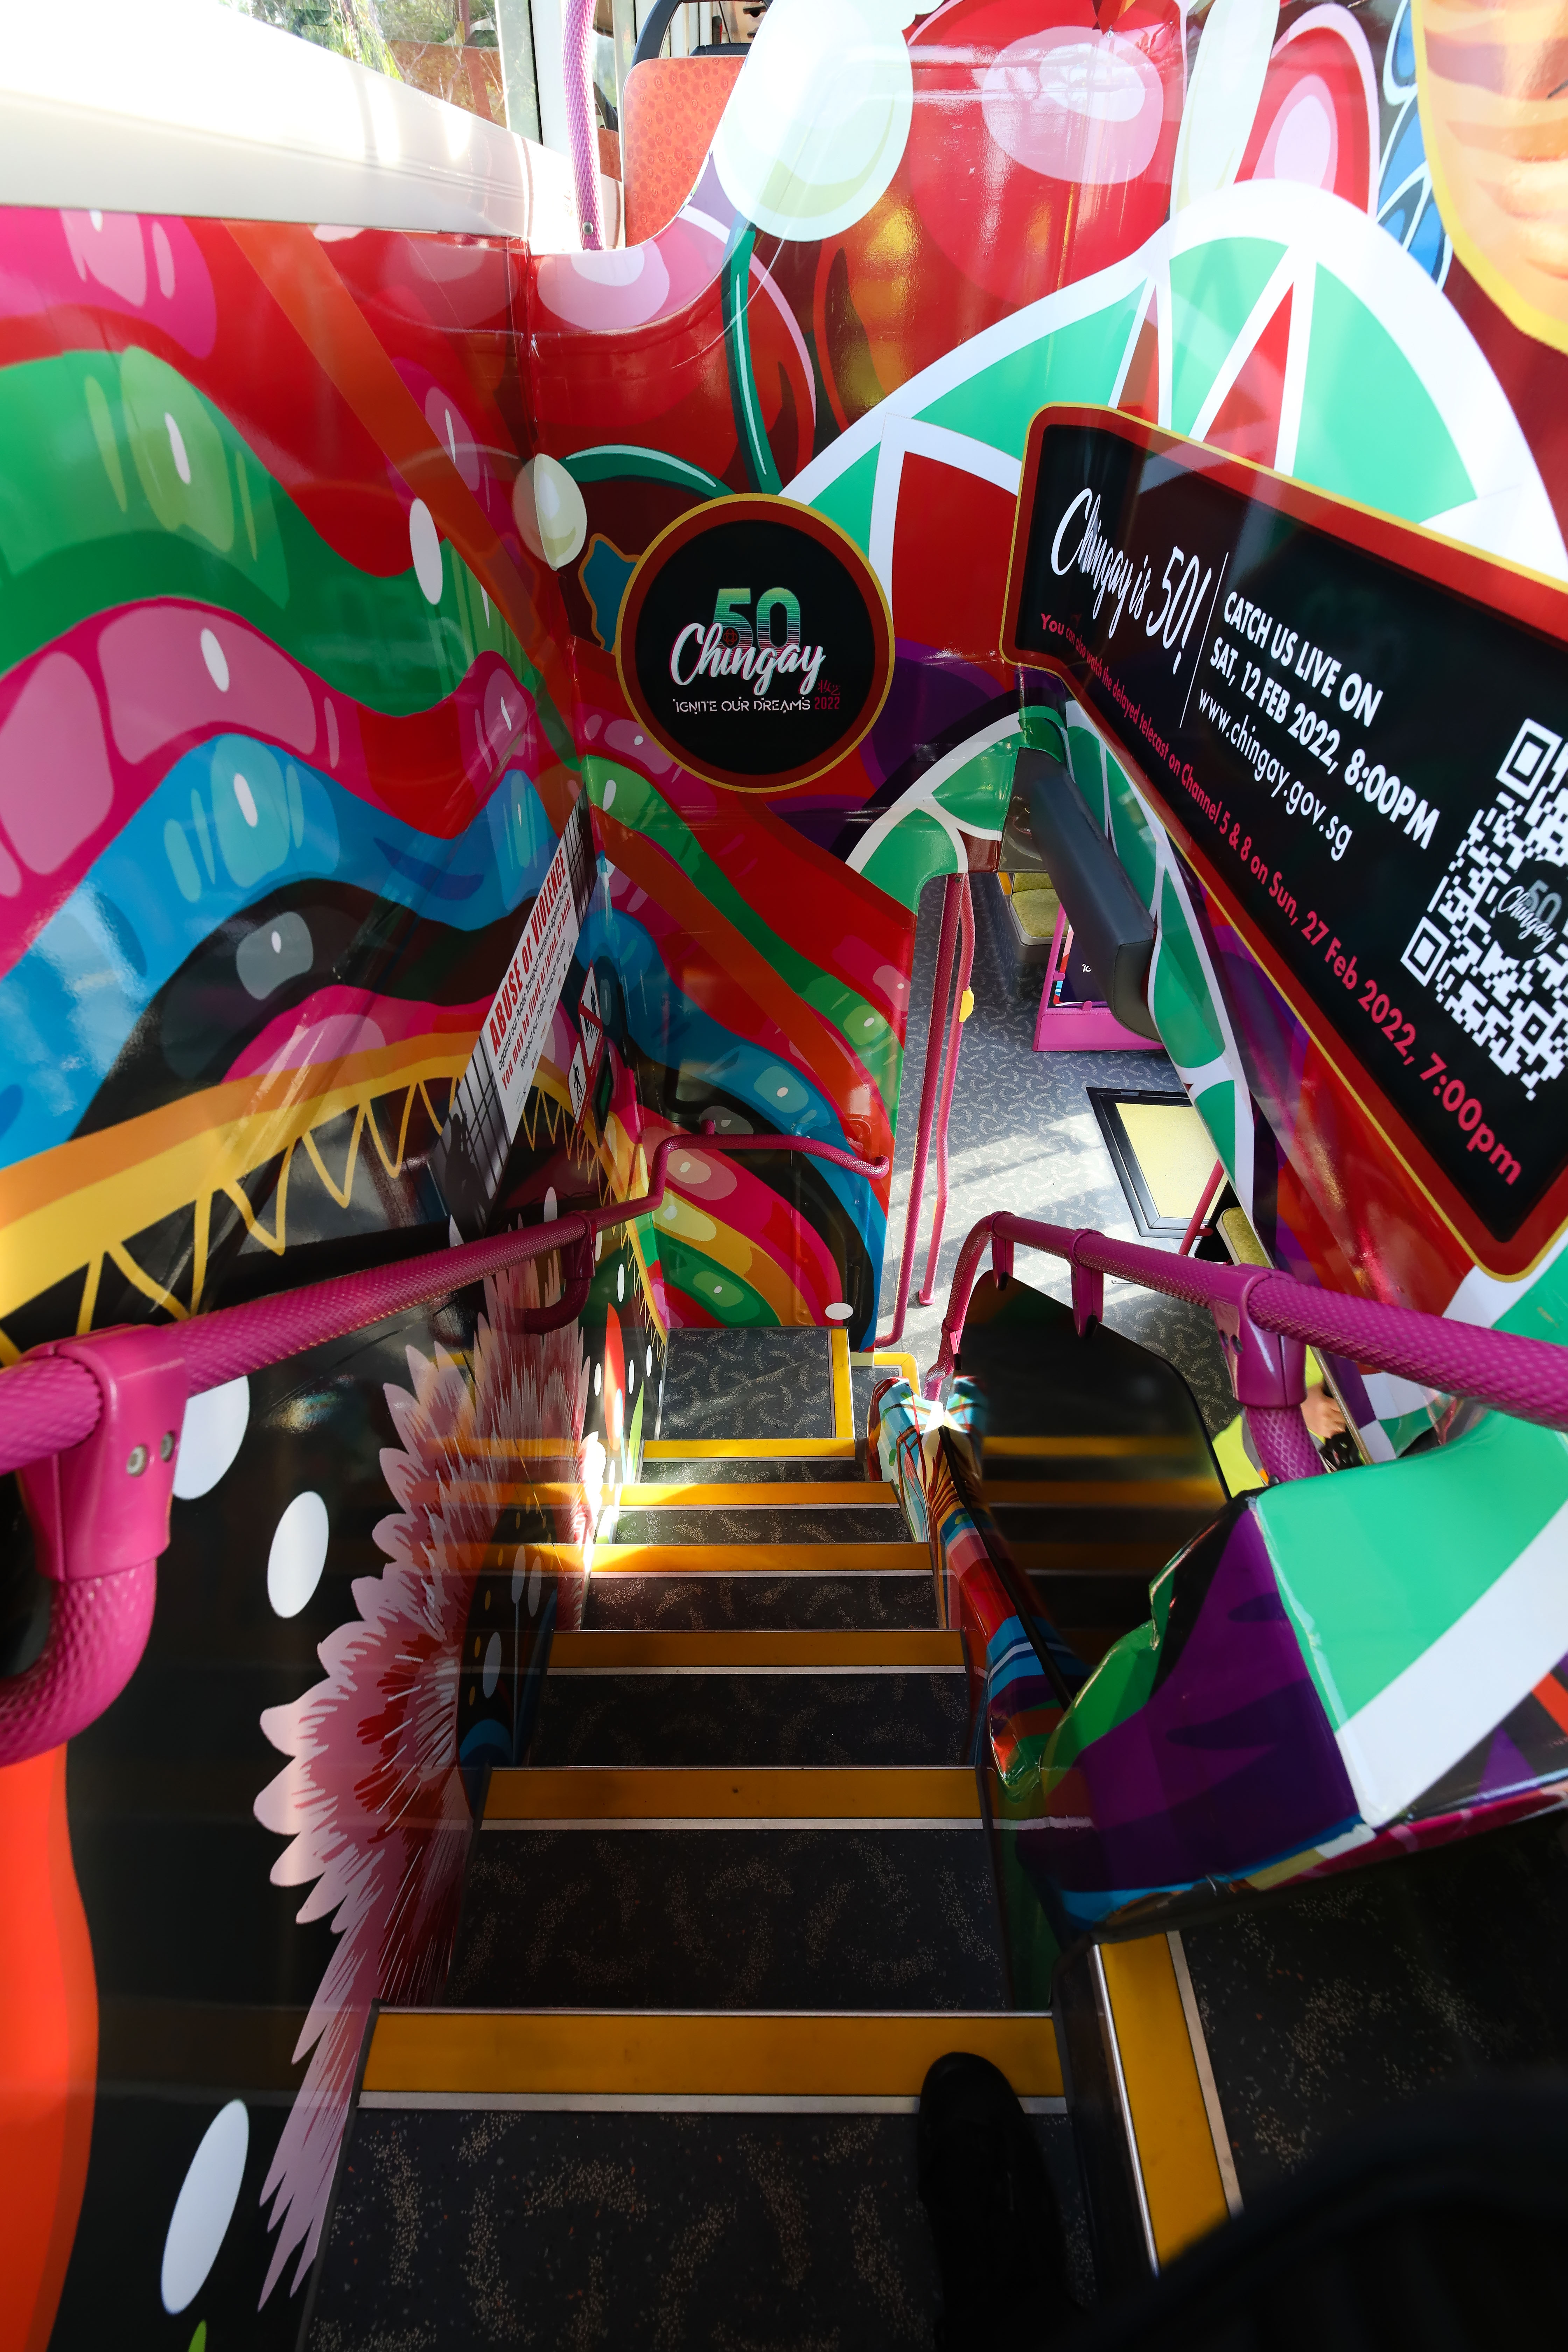 Inside Stairs of Chingay50 Bus